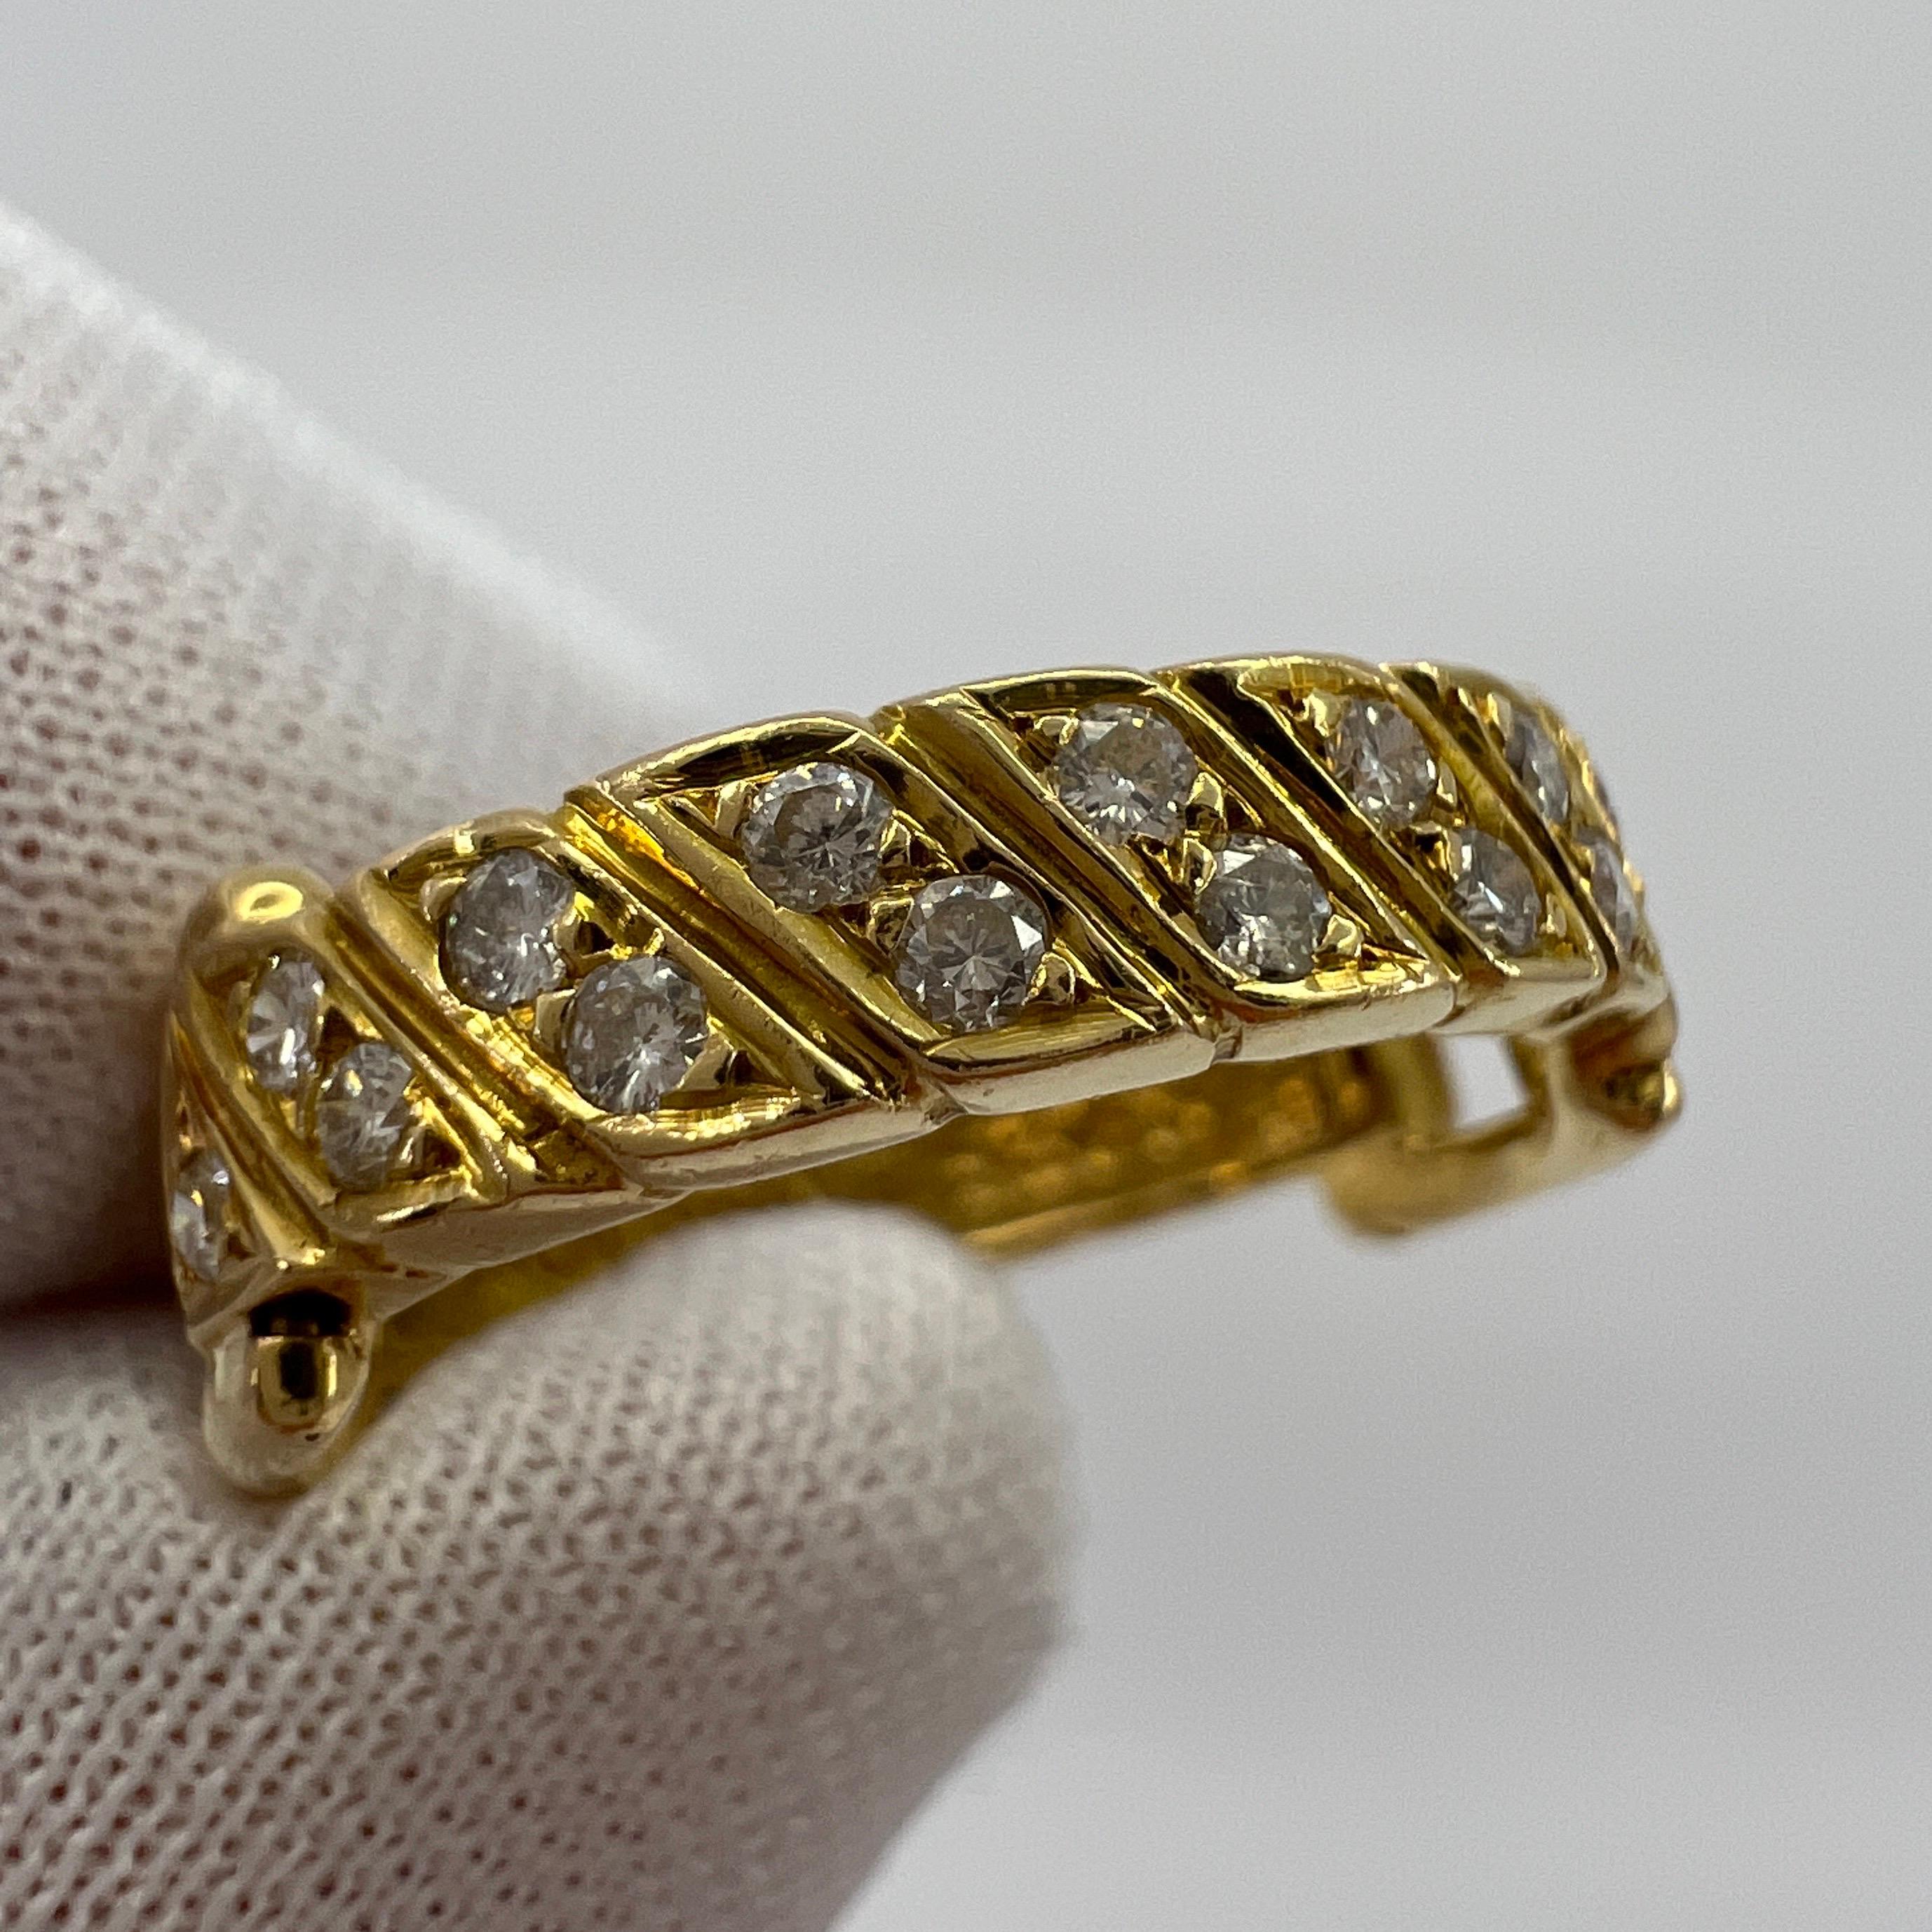 Round Cut Very Rare Vintage Van Cleef & Arpels 18k Yellow Gold Diamond Buckle Band Ring